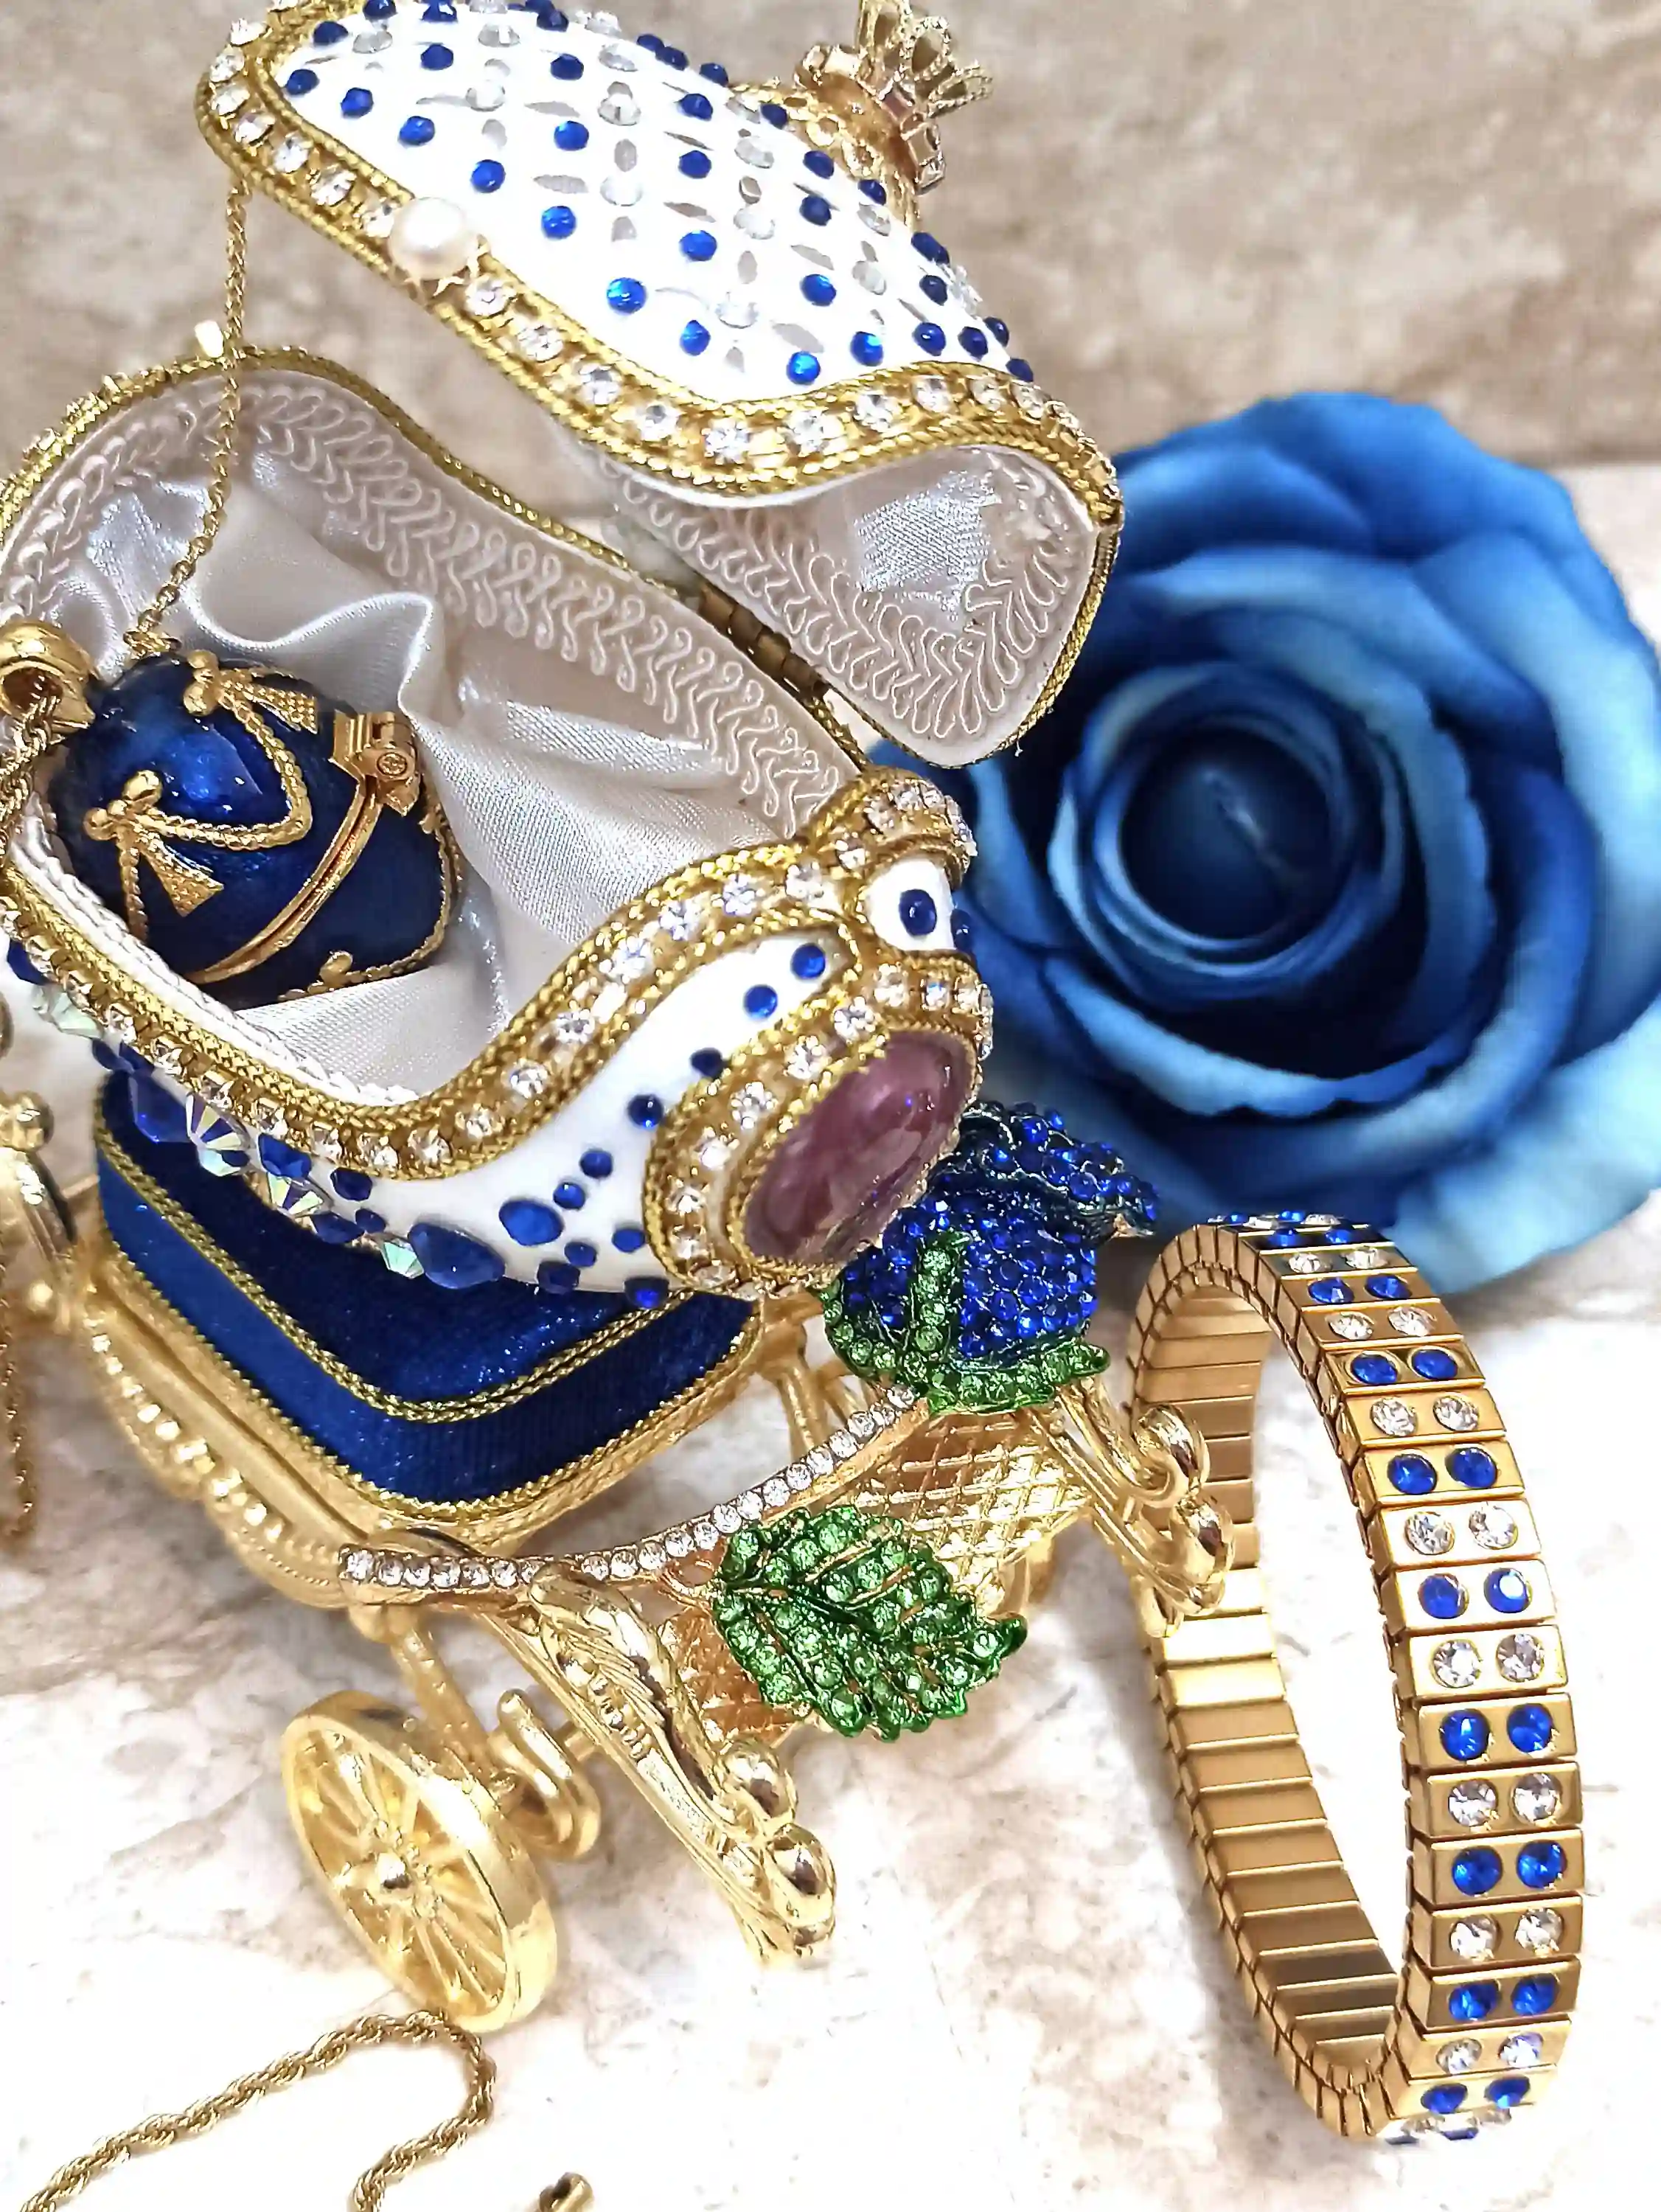 Blue Faberge Egg style ONE of a KIND Luxury Wedding Gift, 430 Sapphires & Diamonds Natural Handcarved Egg 24k Daughter wedding gift from Mom 